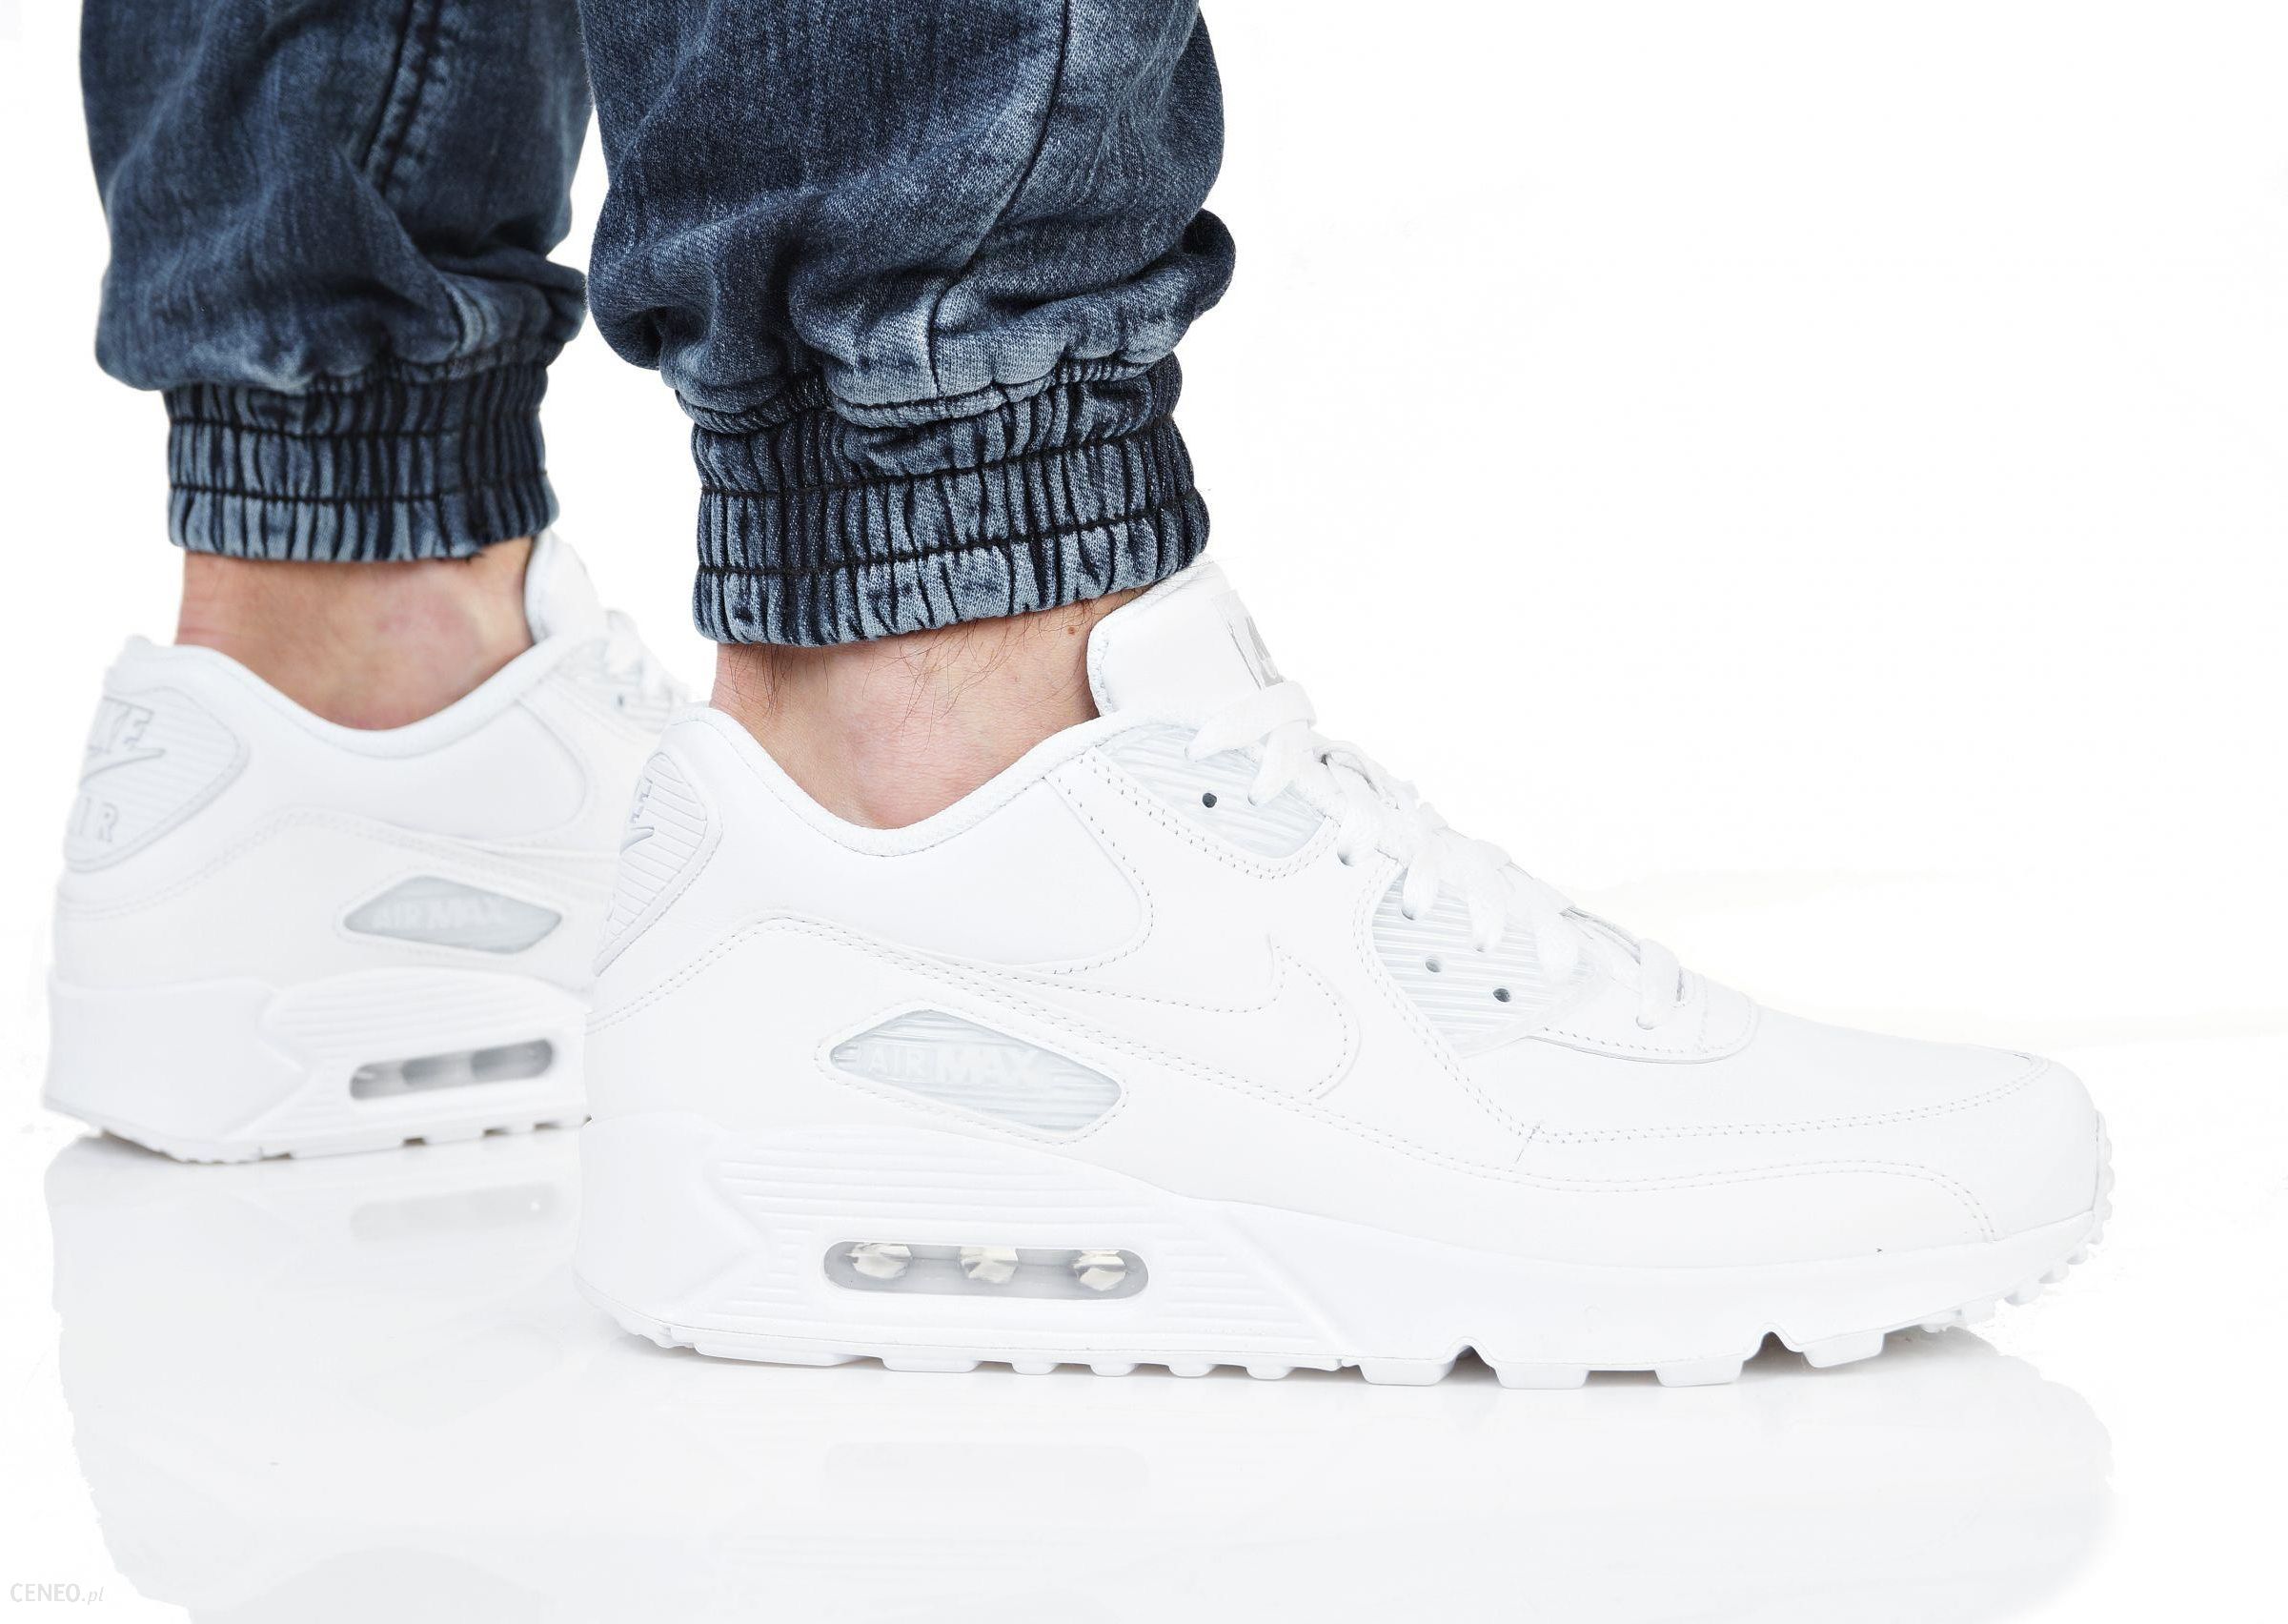 air max 90 leather 302519 113